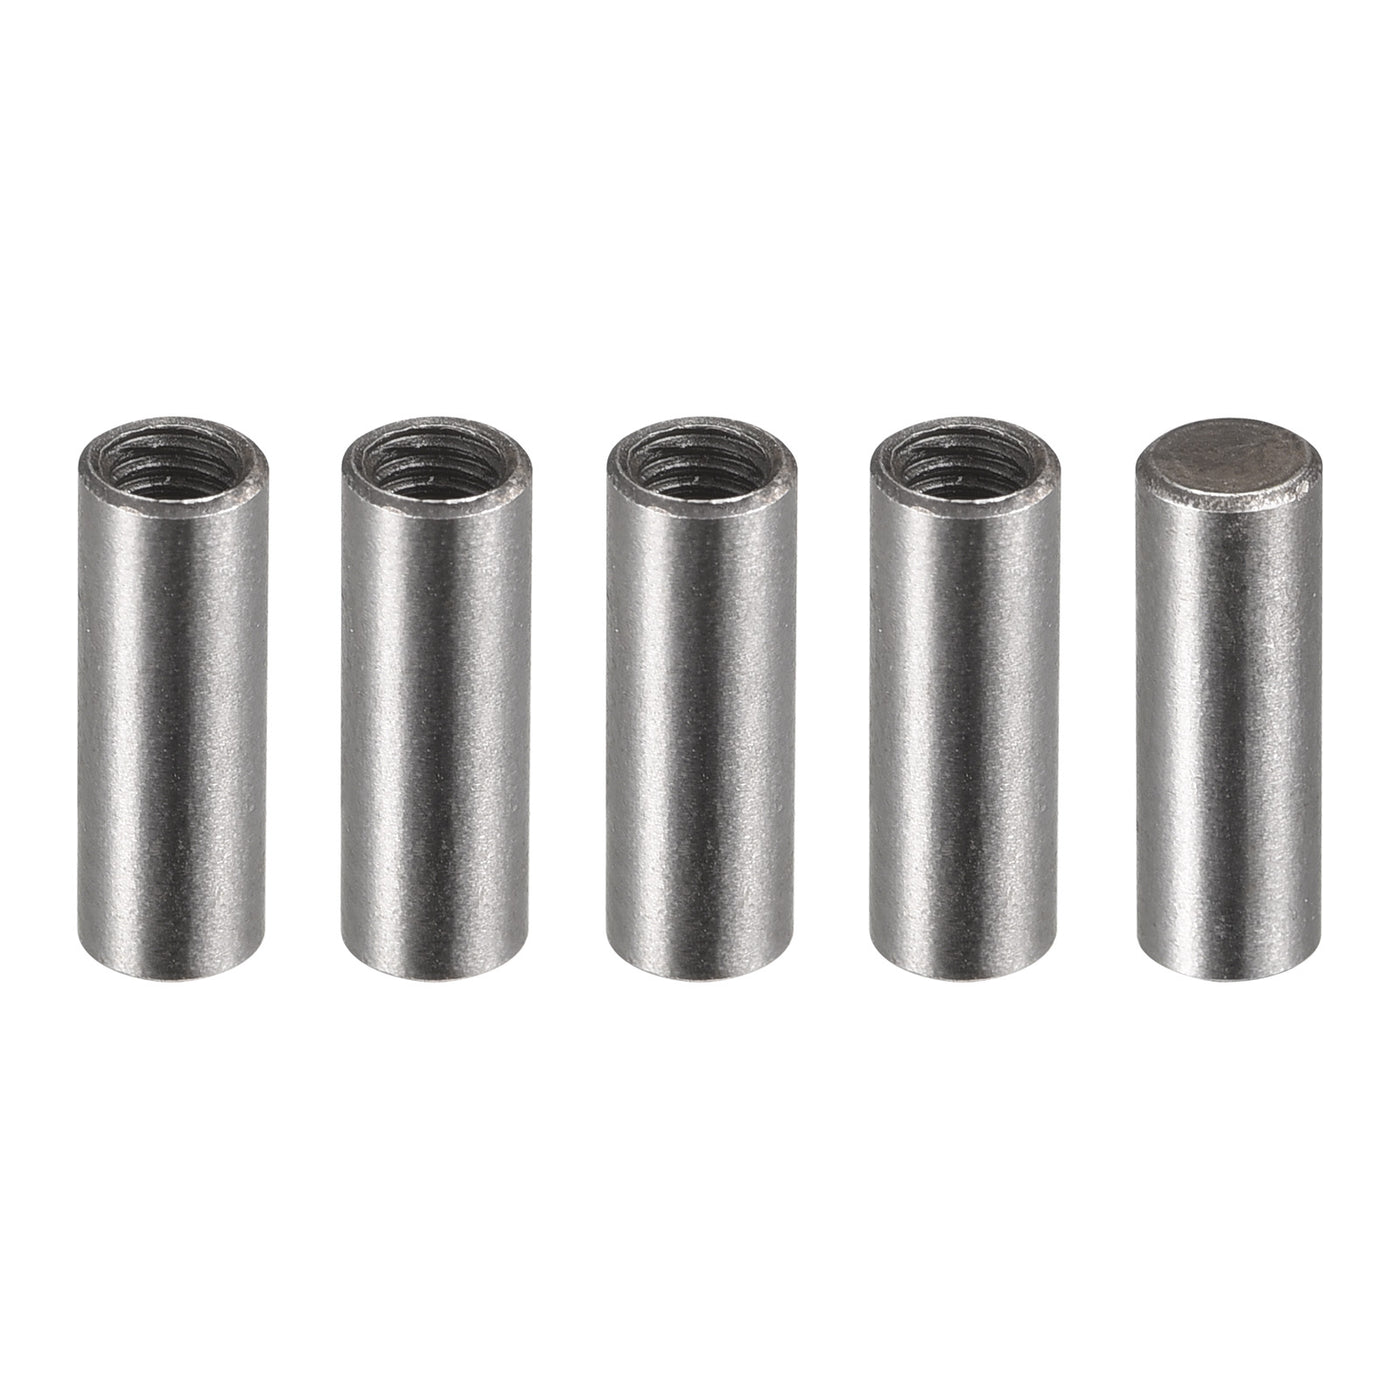 uxcell Uxcell Carbon Steel Dowel Pin 4 x 12mm M3 Female Thread Cylindrical Shelf Support Pin 5Pcs